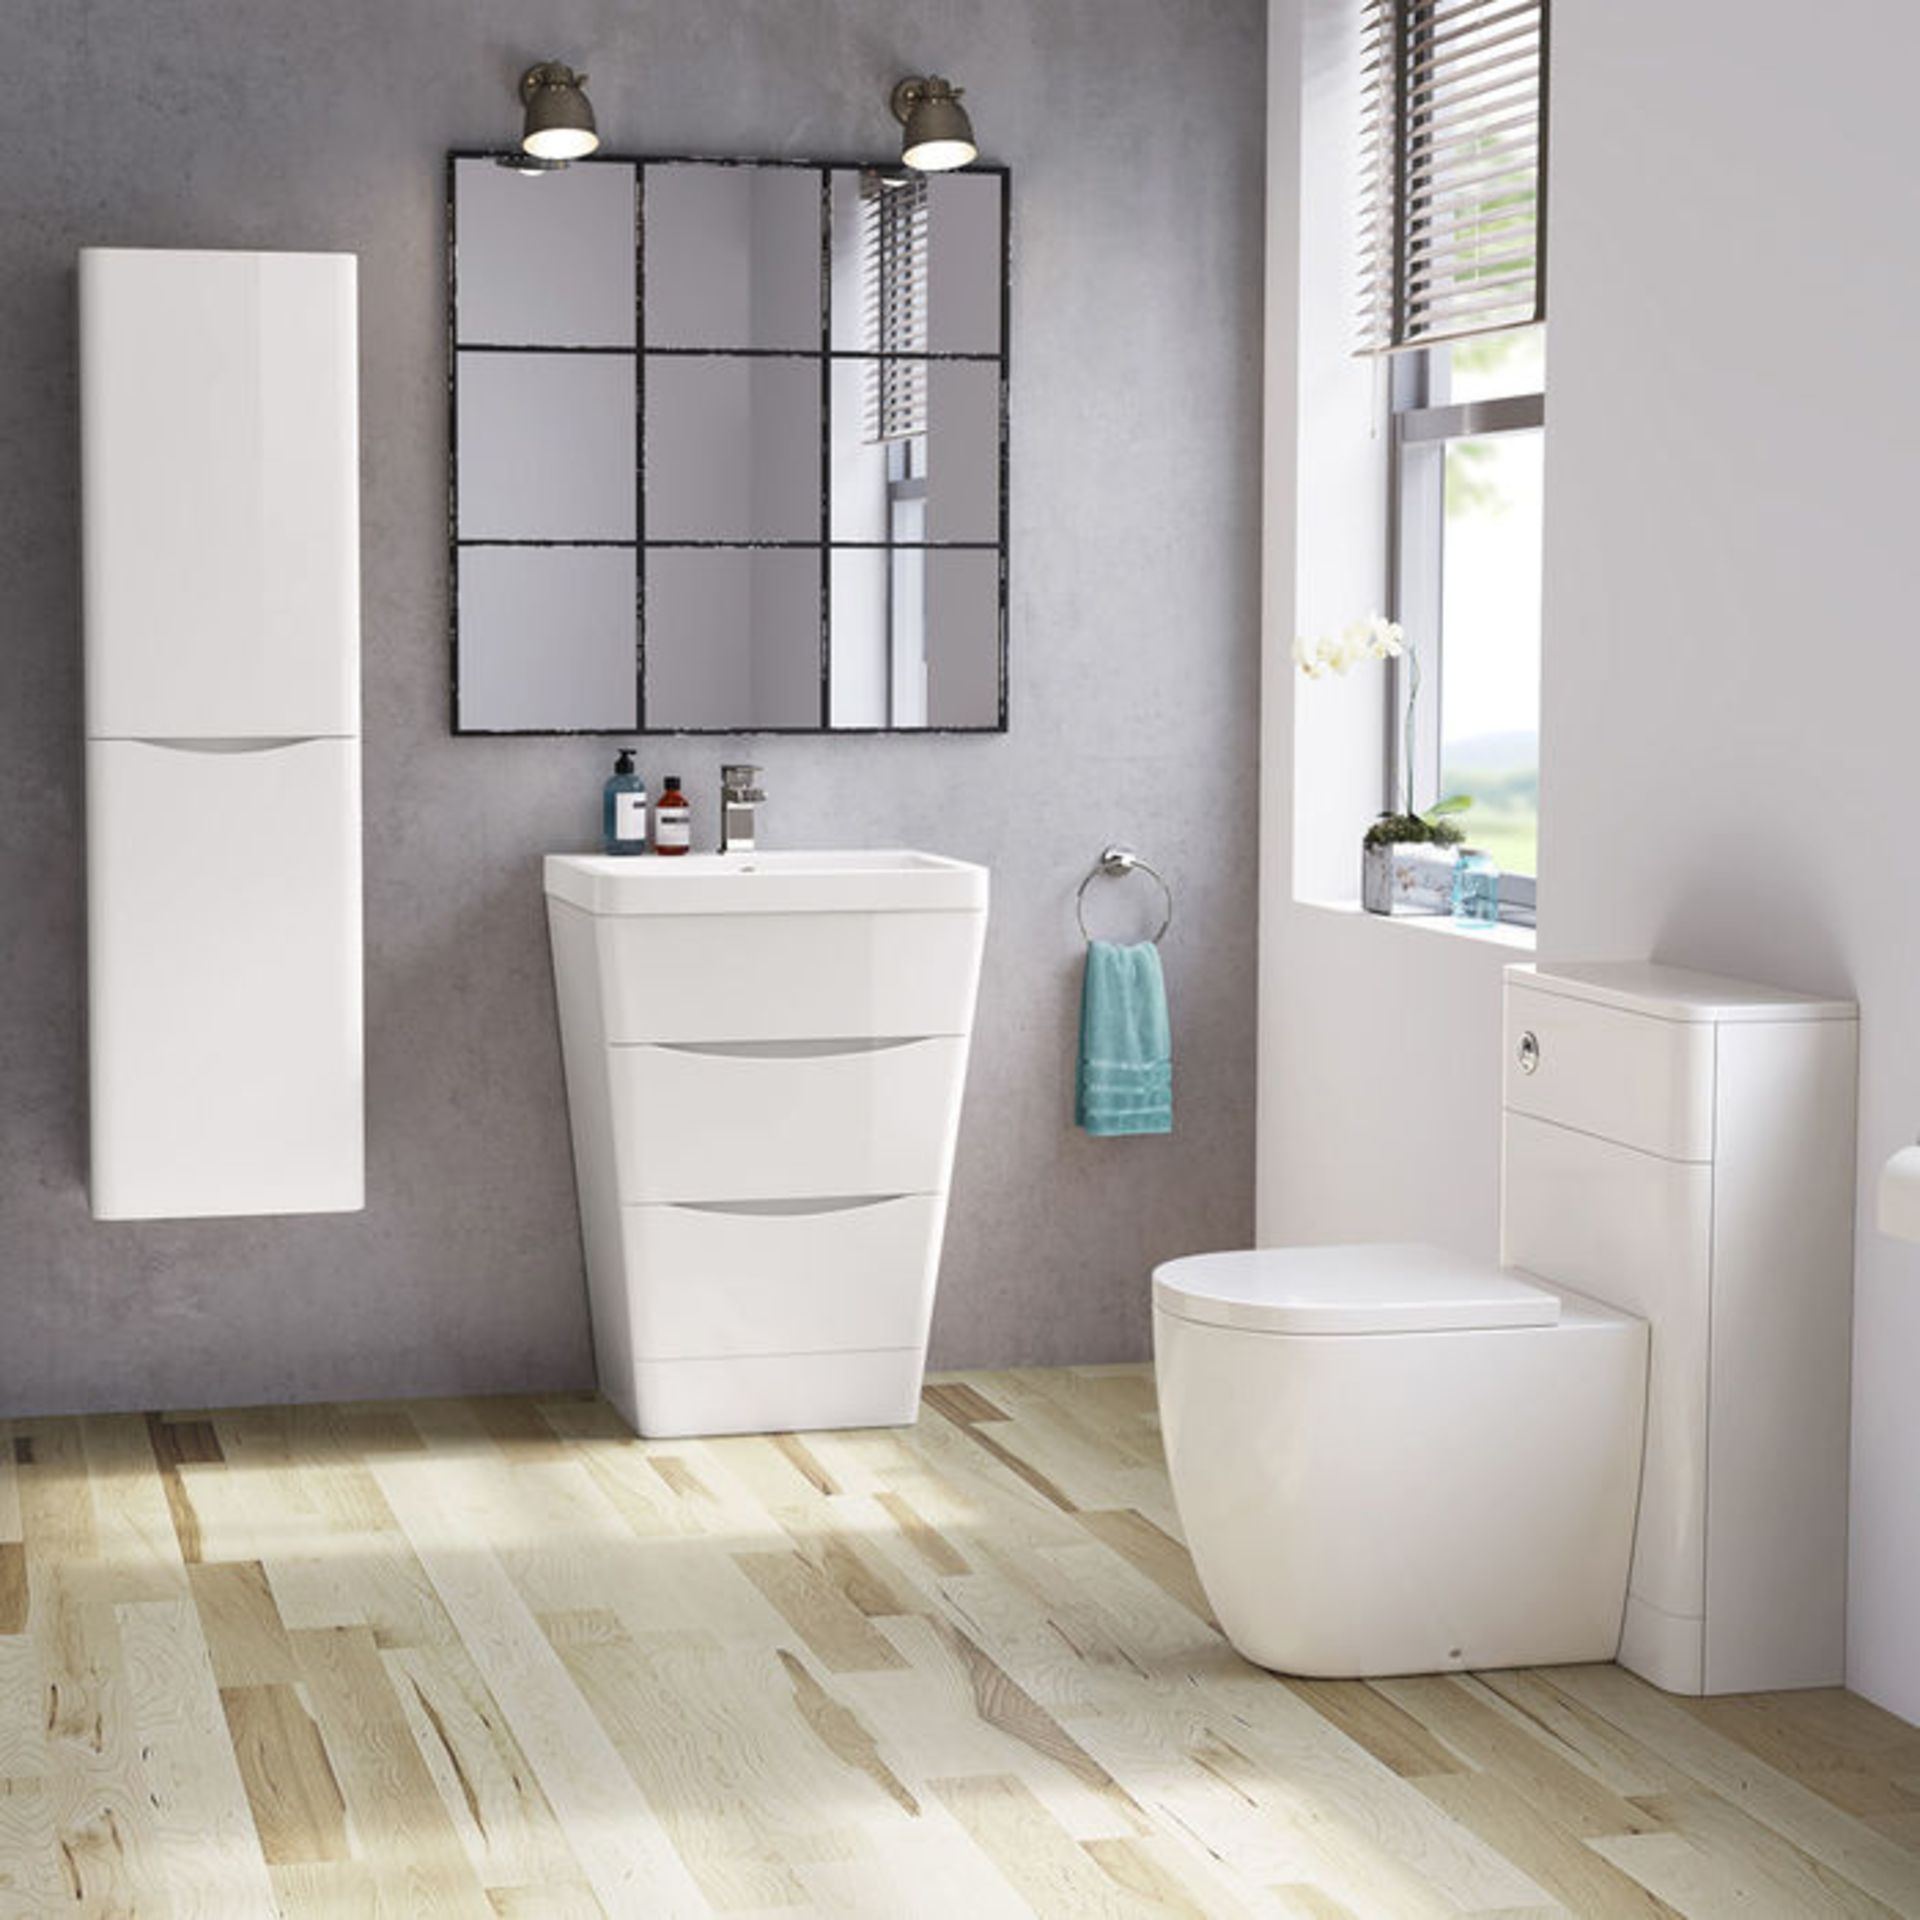 NEW & BOXED 600mm Austin II Gloss White Built In Basin Drawer Unit - Floor Standing. RRP £799... - Image 2 of 2